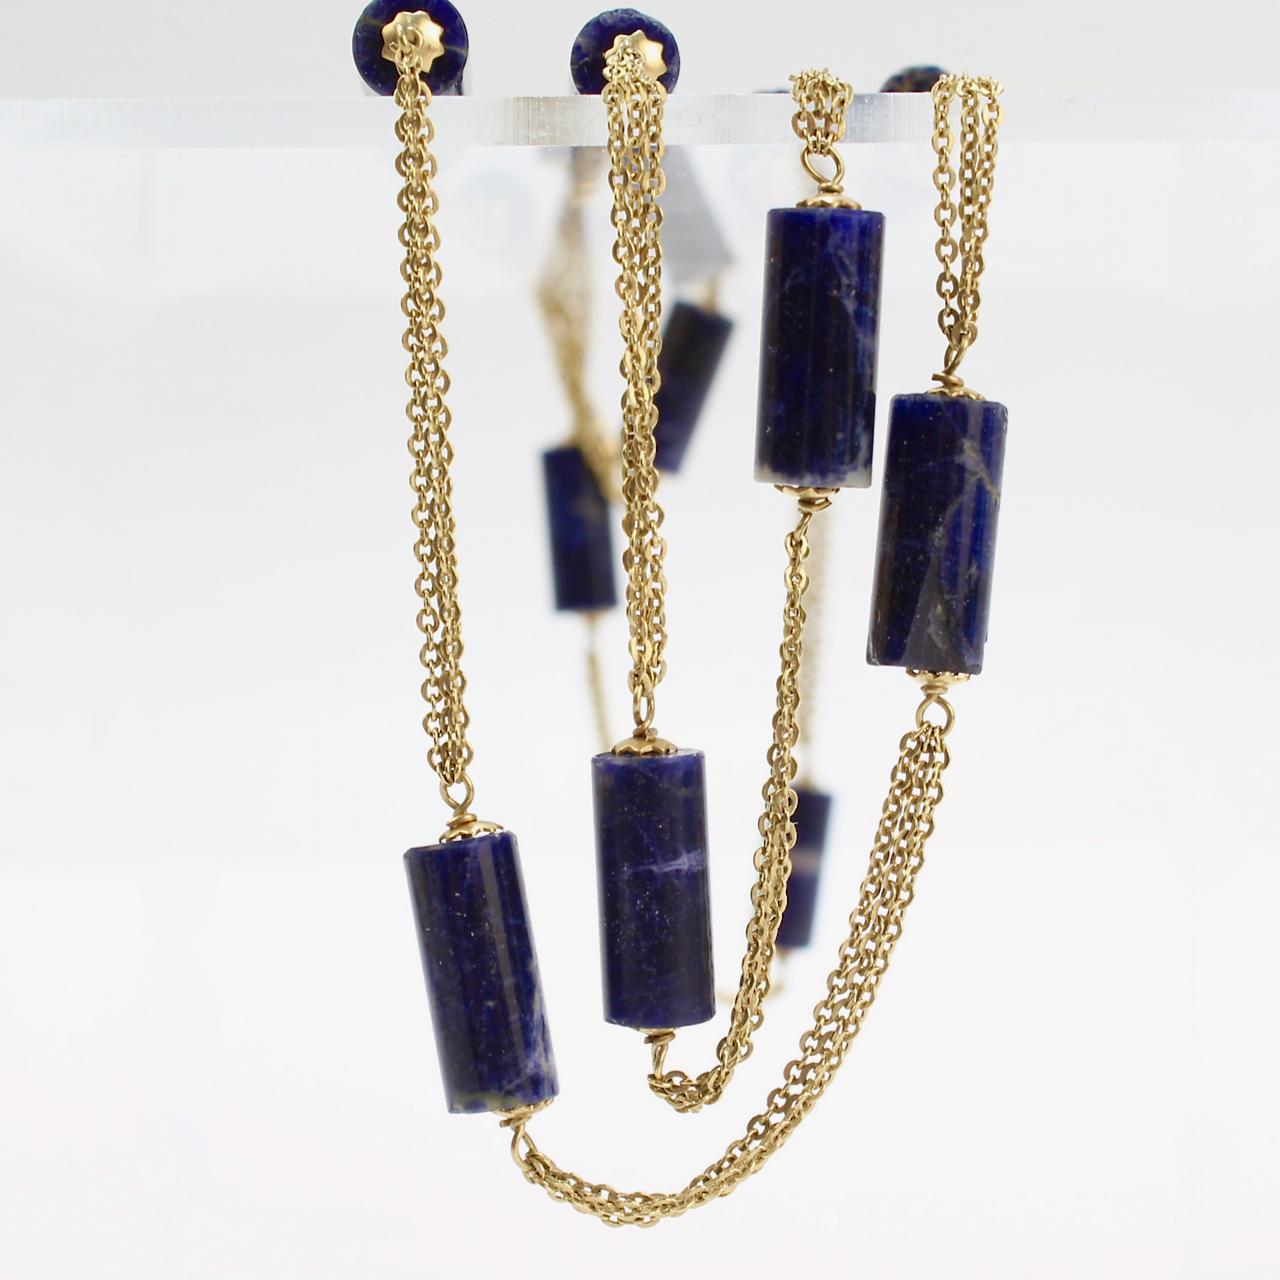 Signed 18 Karat Gold and Lapis Beaded Rope Length Necklace by Filippini Fratteli In Fair Condition For Sale In Philadelphia, PA